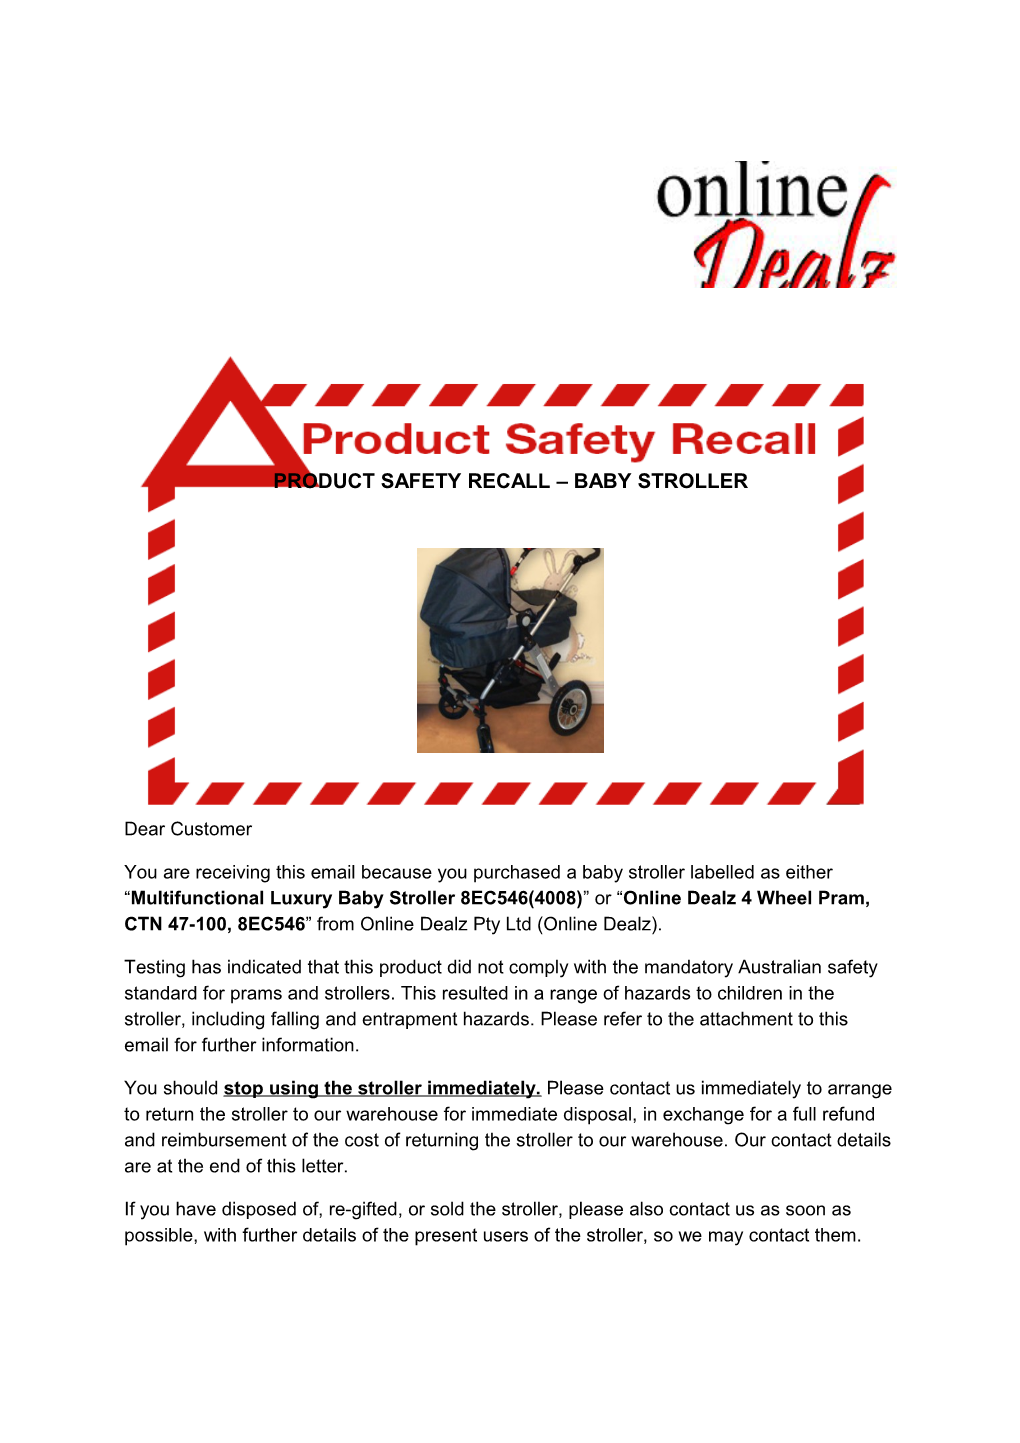 Product Safety Recall Baby Stroller